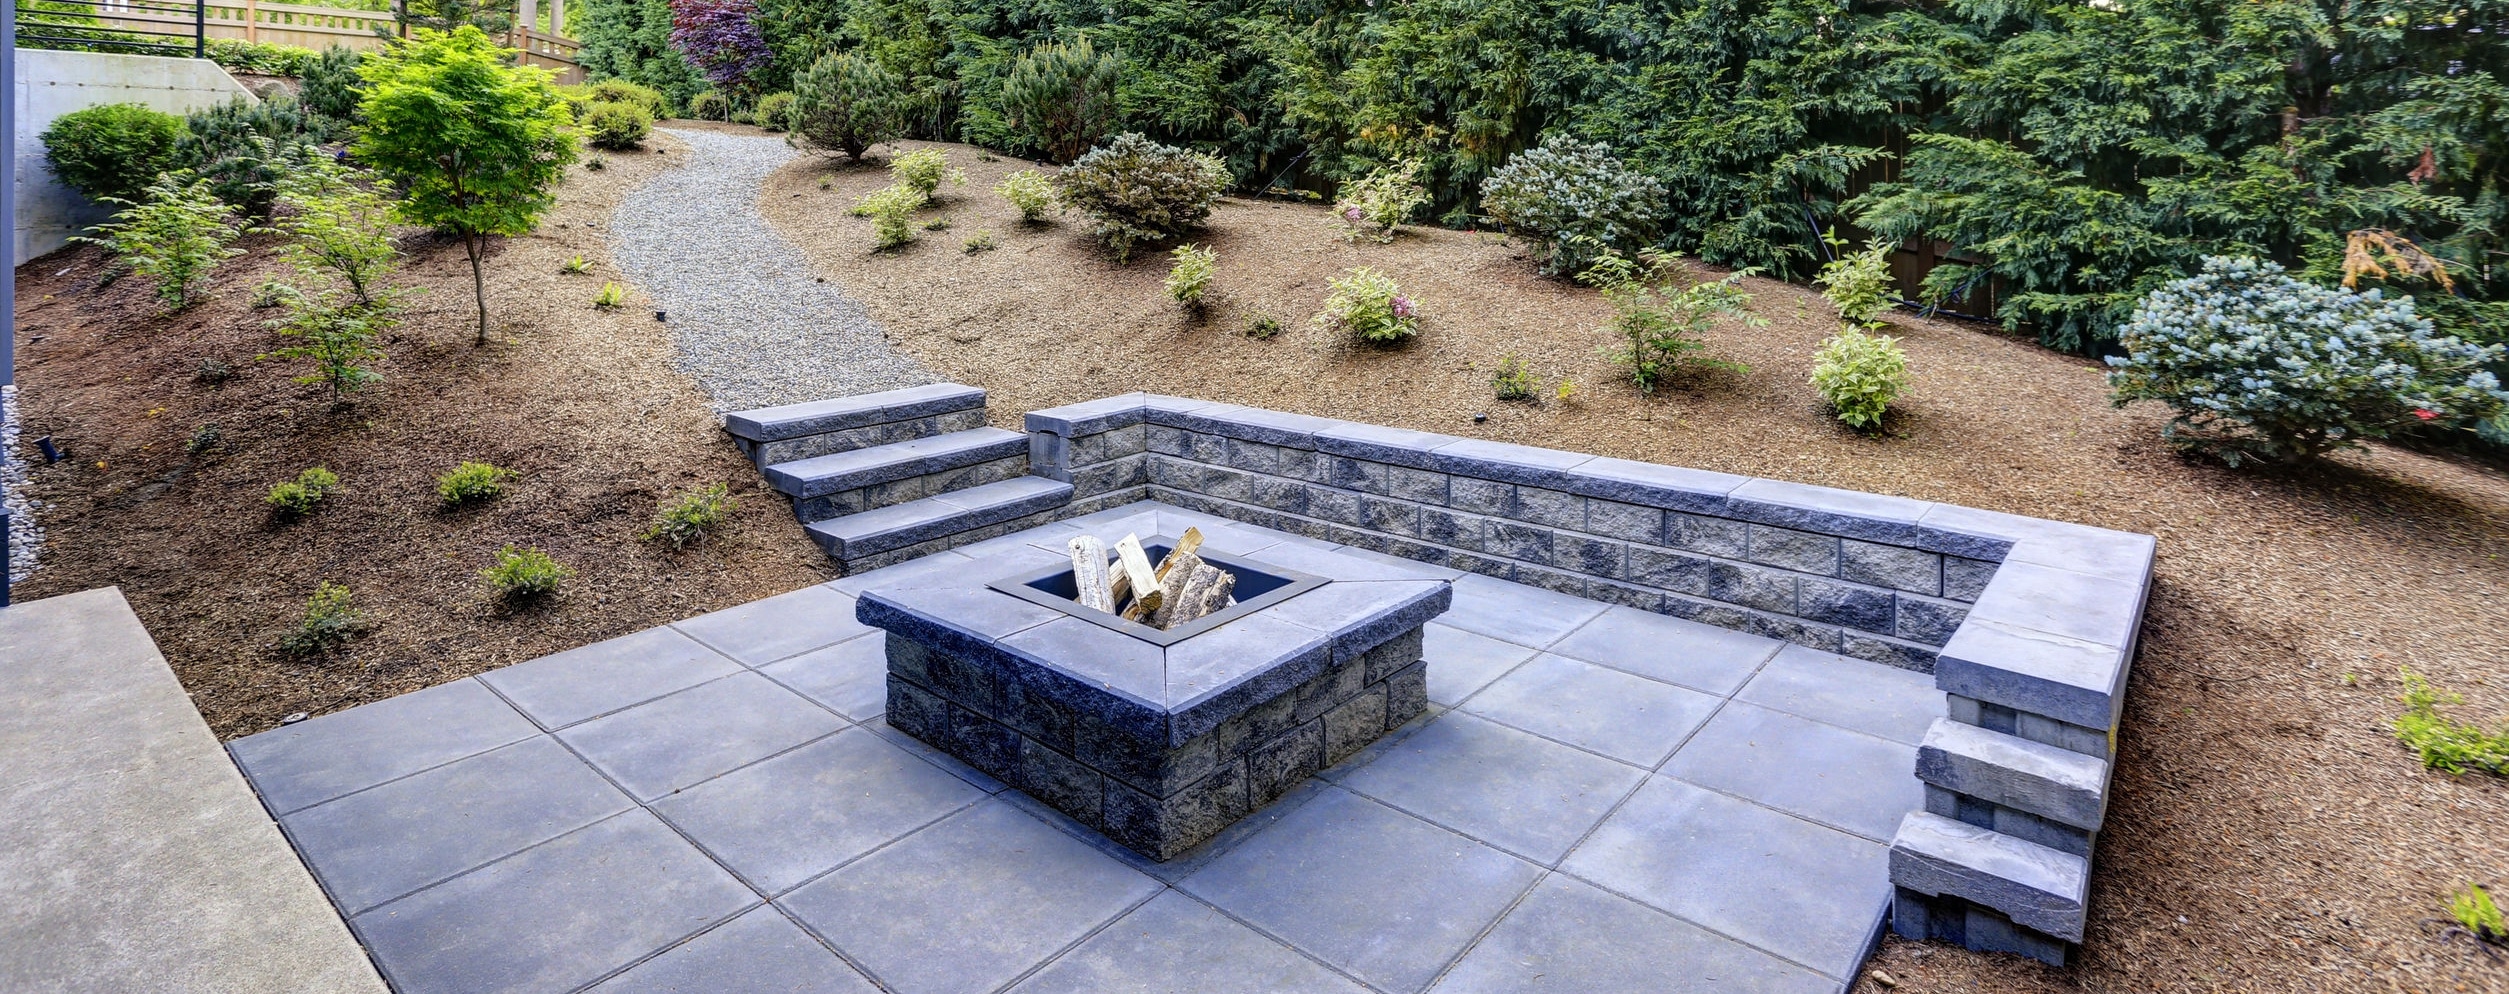 rectangular concrete fire pit framed by slate pavers and overlooking the lush garden